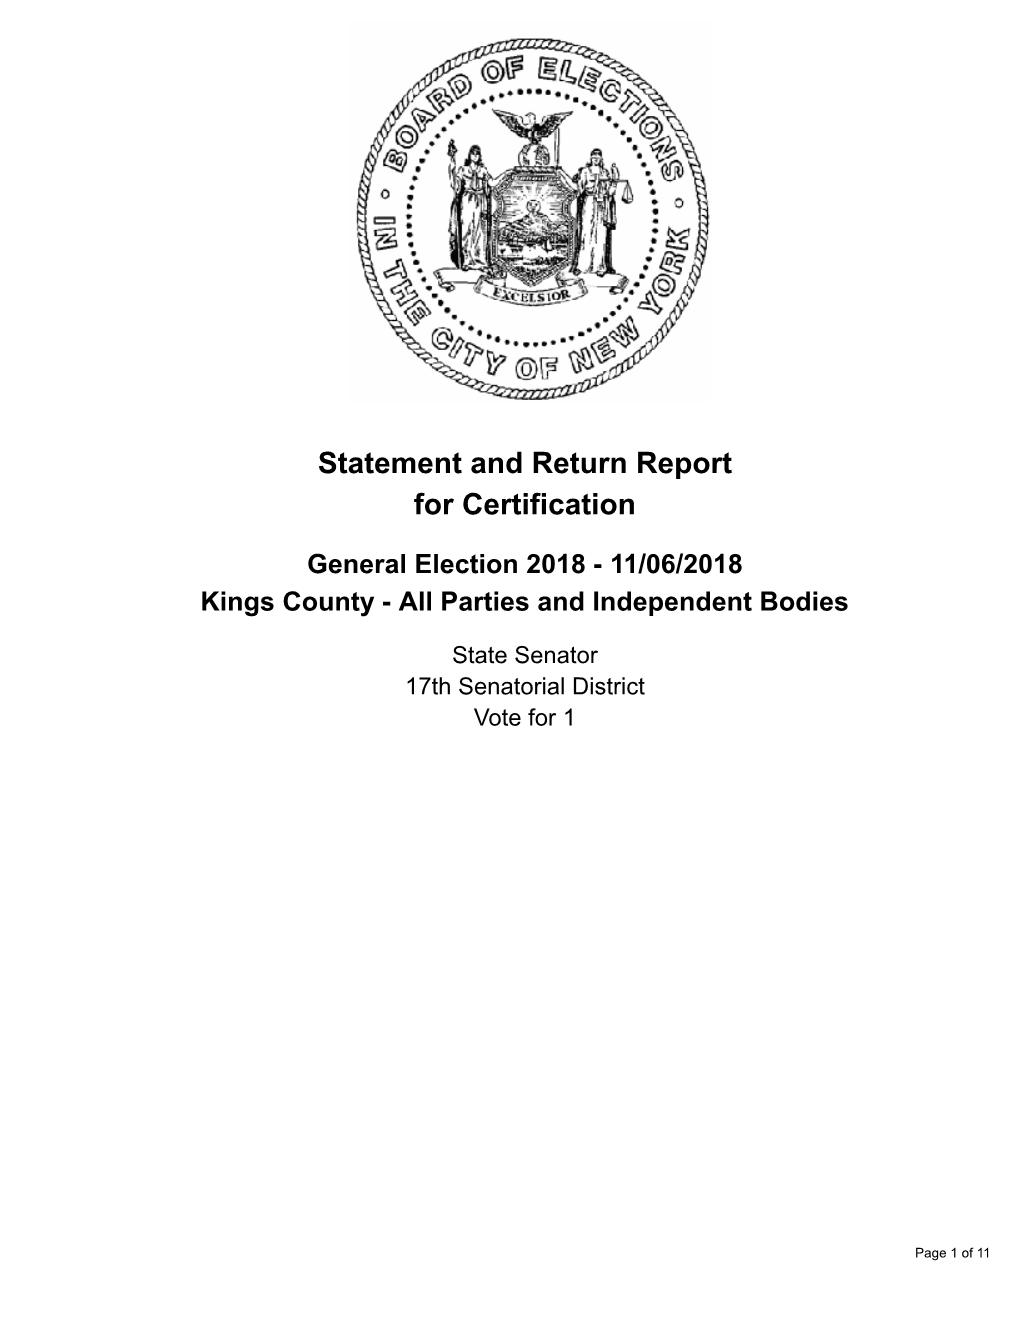 Statement and Return Report for Certification General Election 2018